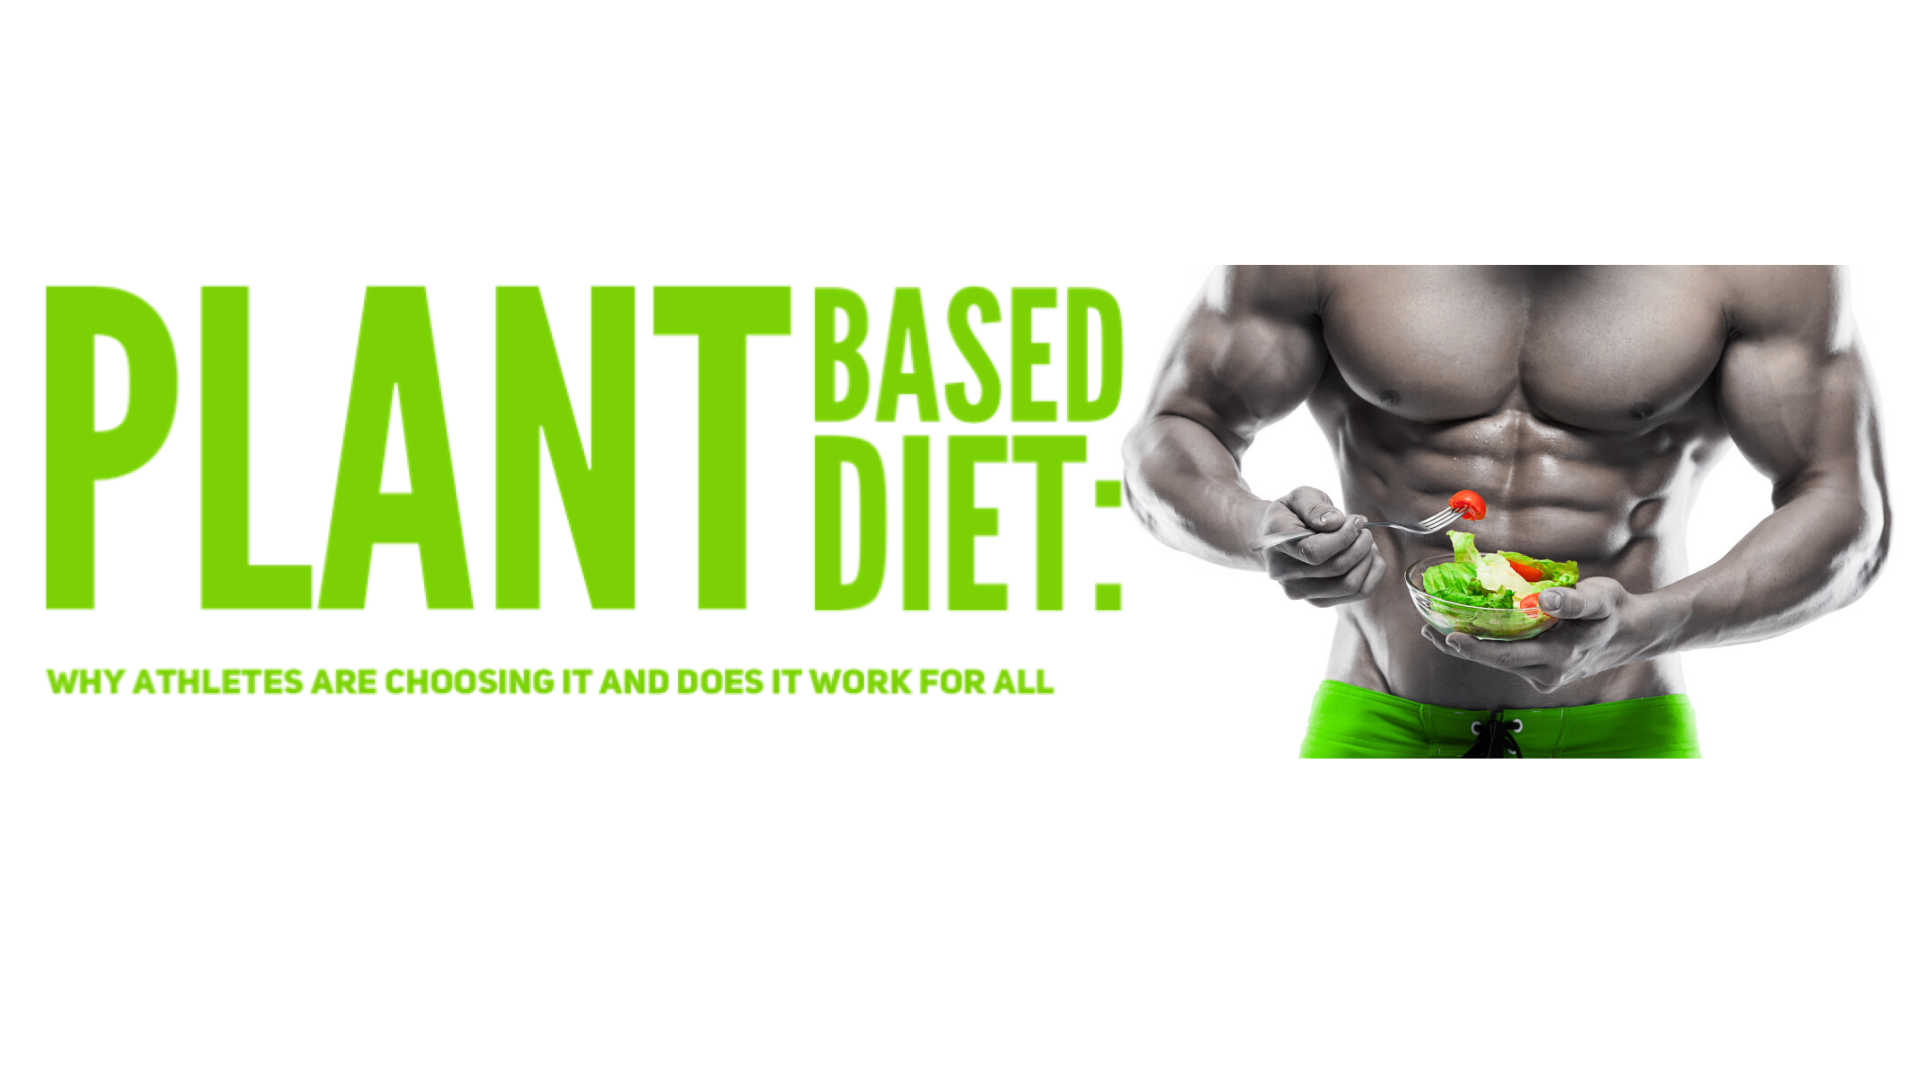 Ryan Fernando - Why athletes are choosing plant based diet? Does it work for all?